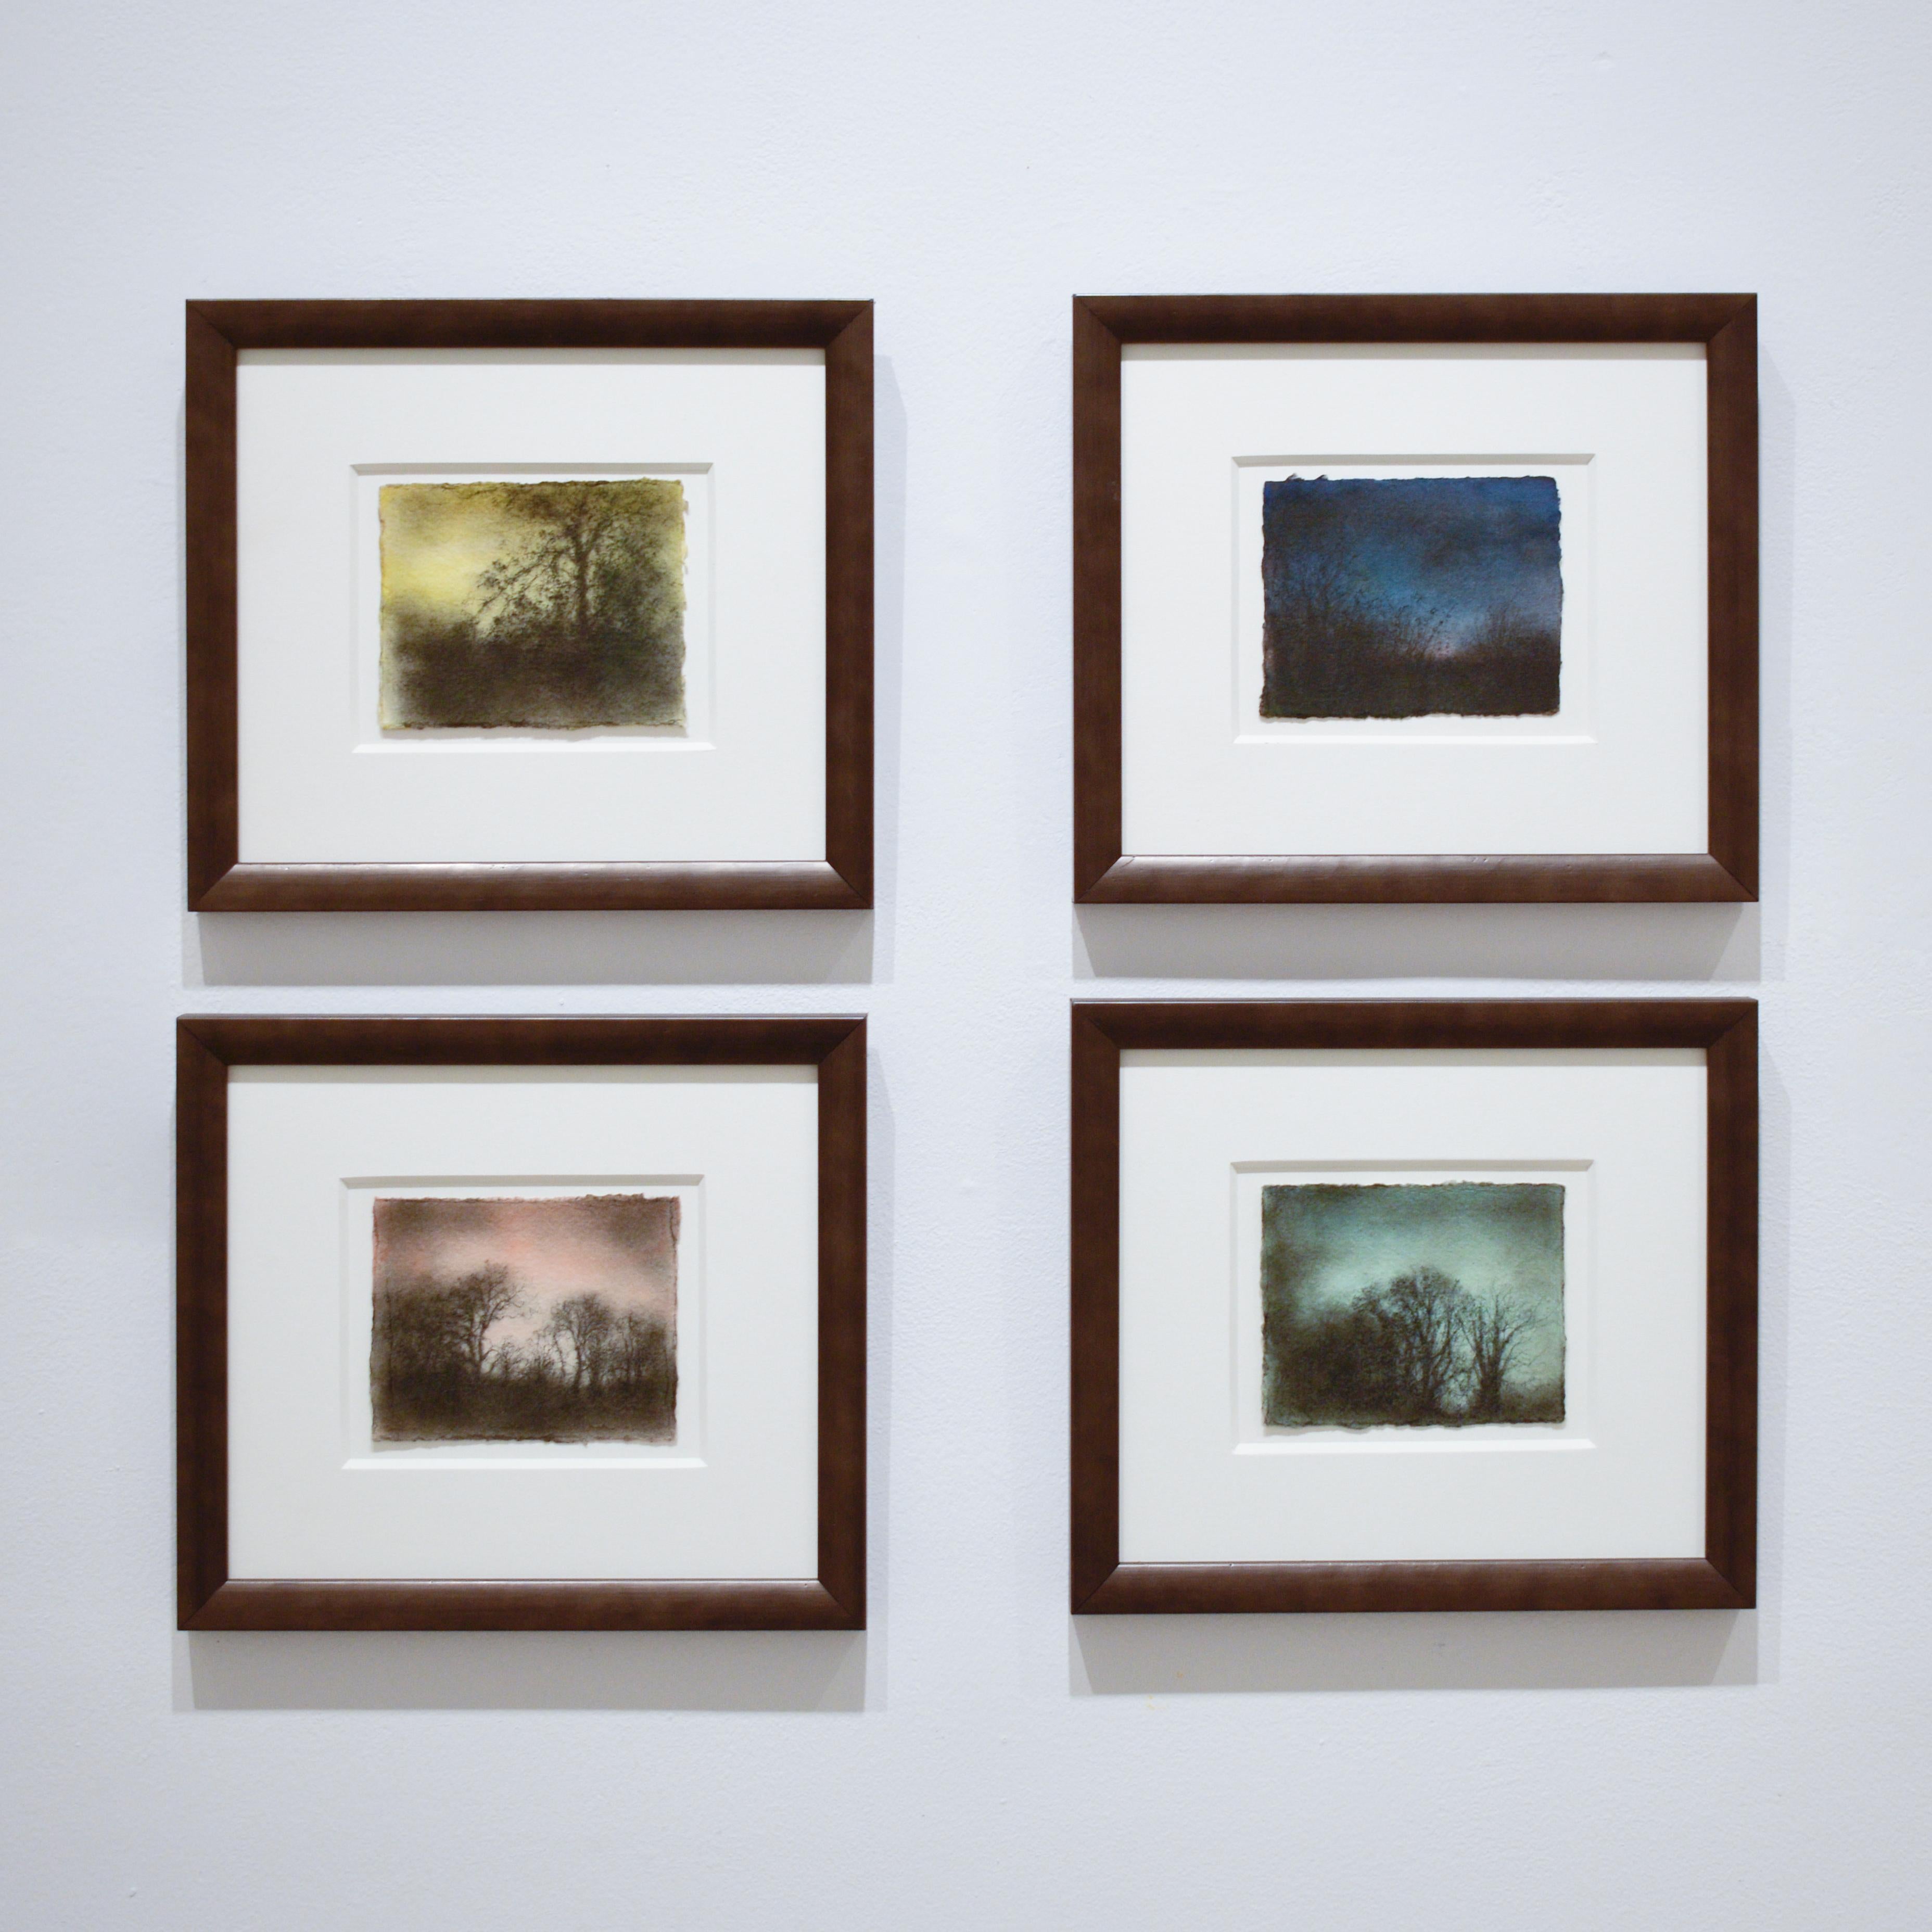 Four framed Reverie drawings by Sue Bryan
$2,600 reduced to $2,400

Charcoal and watercolor on Two Rivers paper
Each measures 4 x 5 inches unframed, 10.5 x 11.5 x 1 inches in a custom Larson Juhl frame with a white 8-ply mat and non-glare